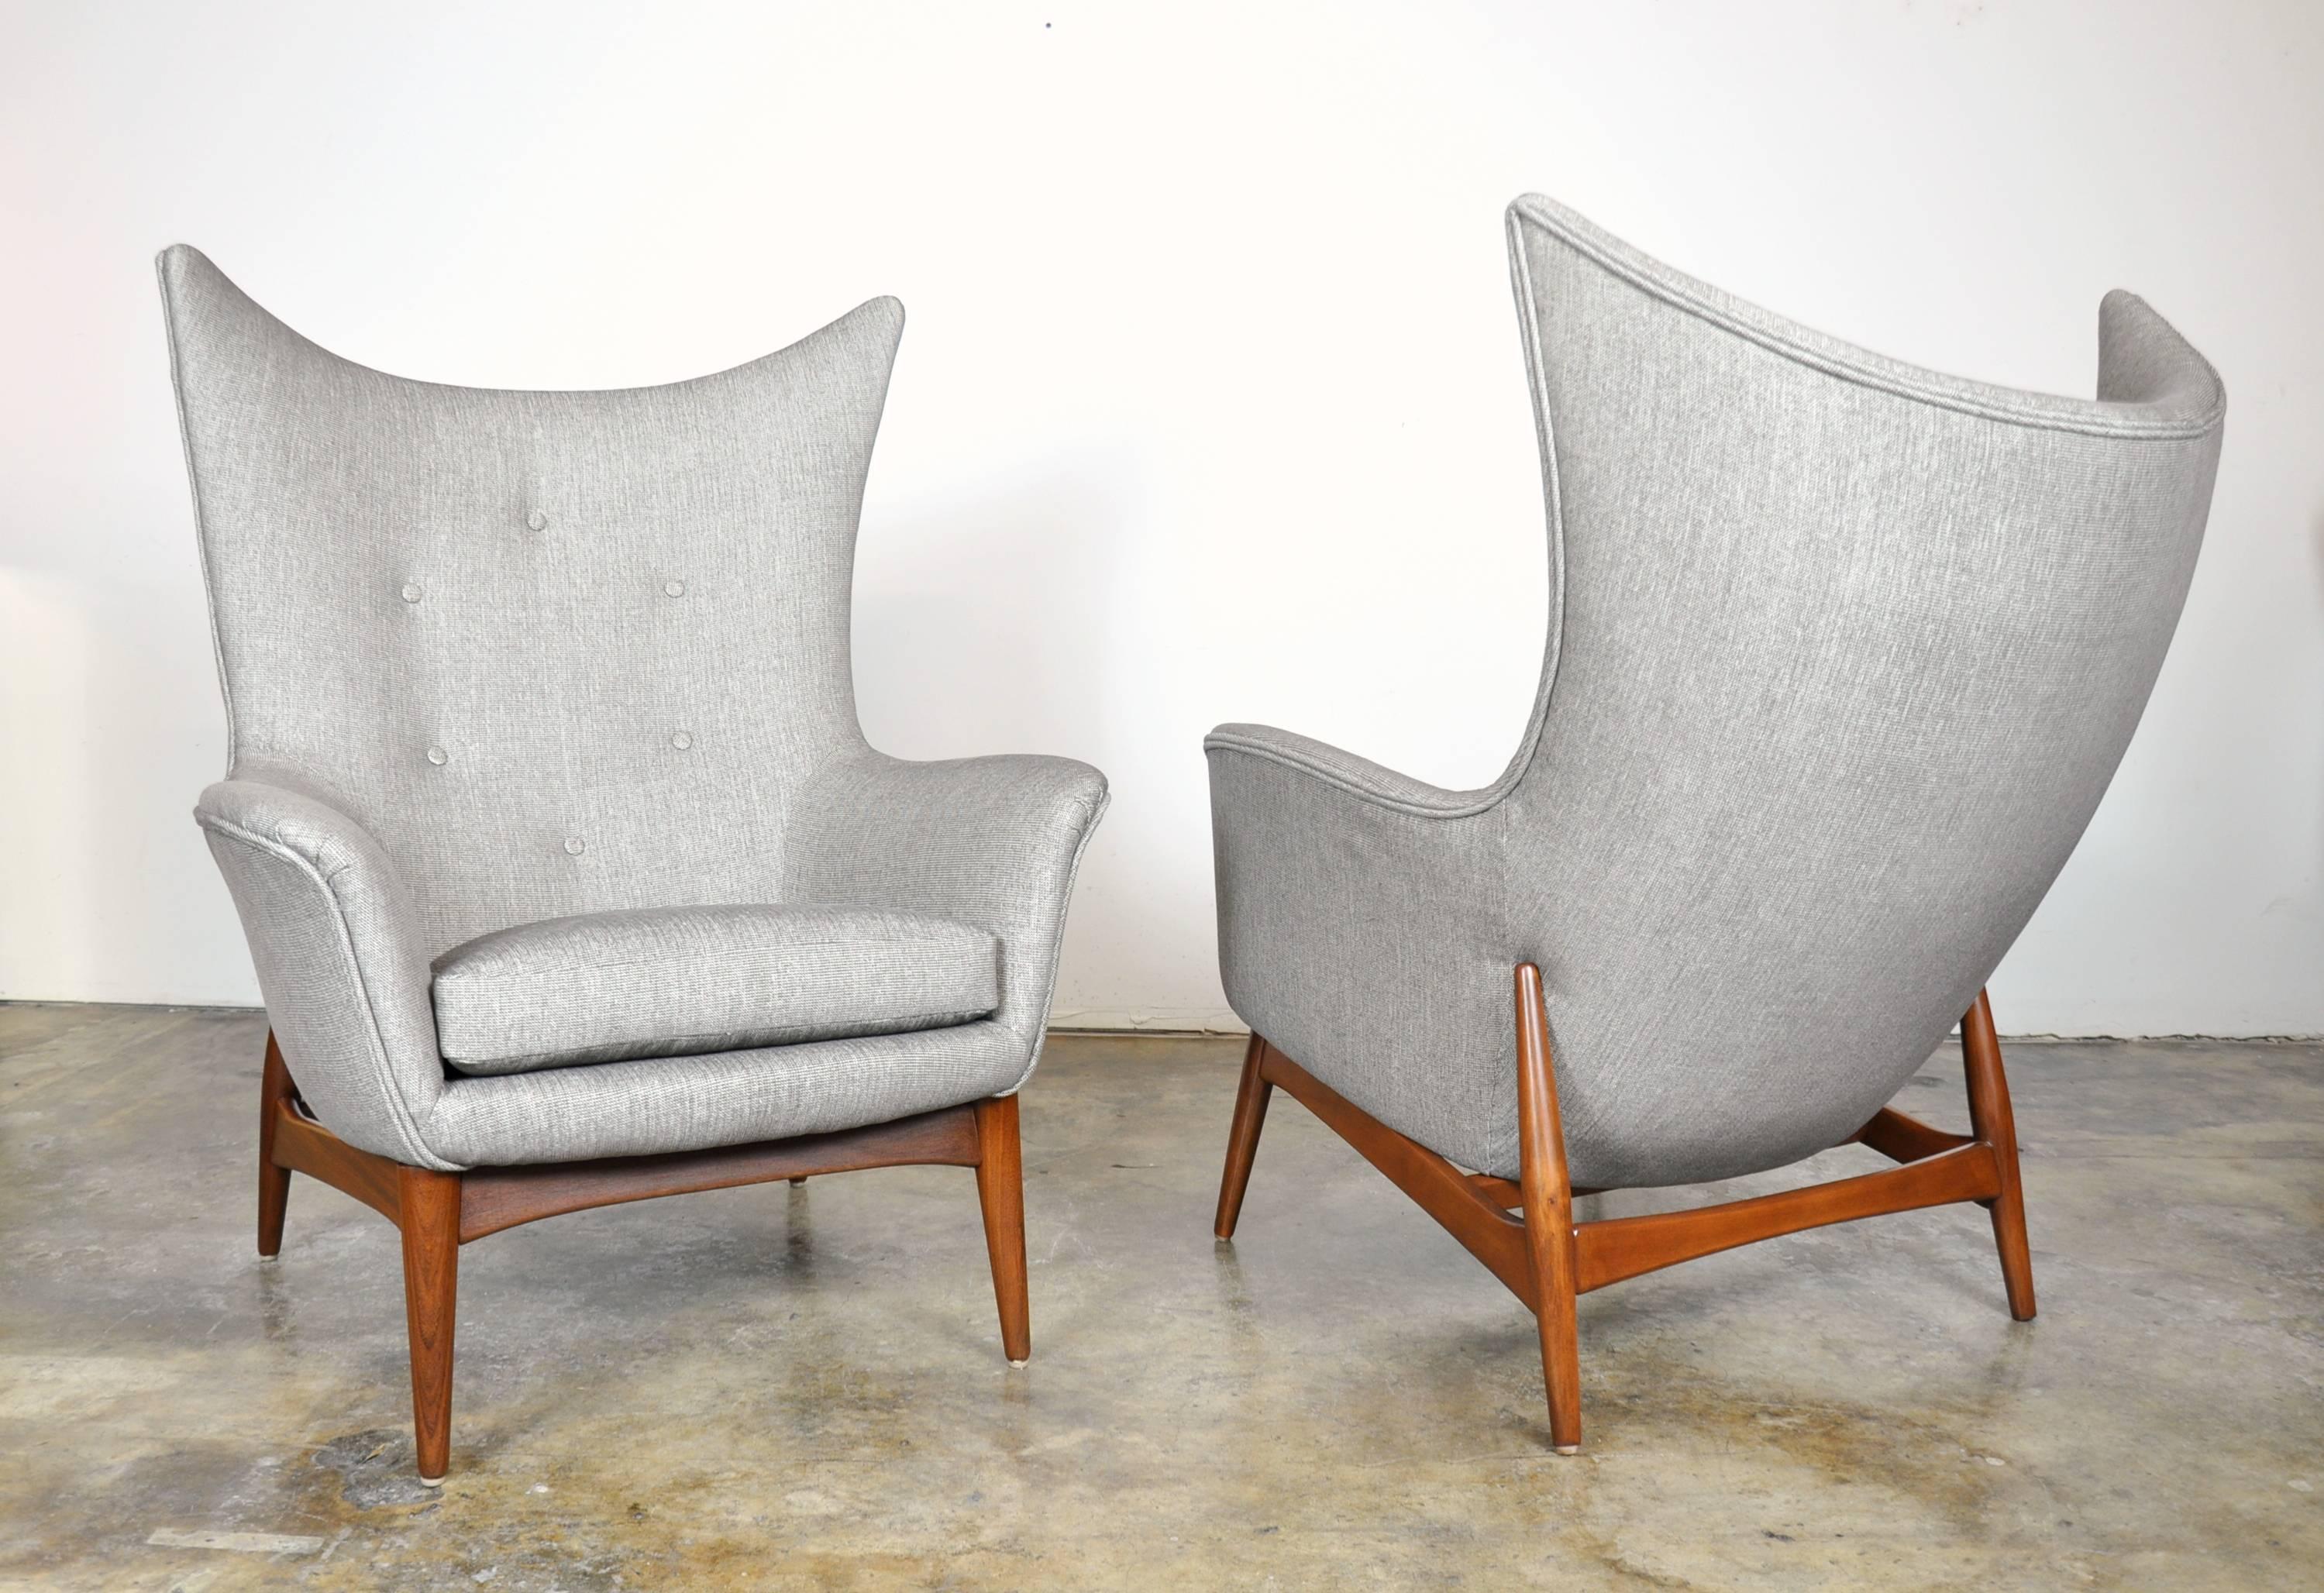 Rare pair of the amazing model 207/5 Mid-Century Danish Modern tufted lounge chairs designed by Henry Walter Klein for NA Jorgensens Mobelfabrik aka Bramin Mobler in the early 1960s. Professionally refinished and reupholstered, each chair offers an